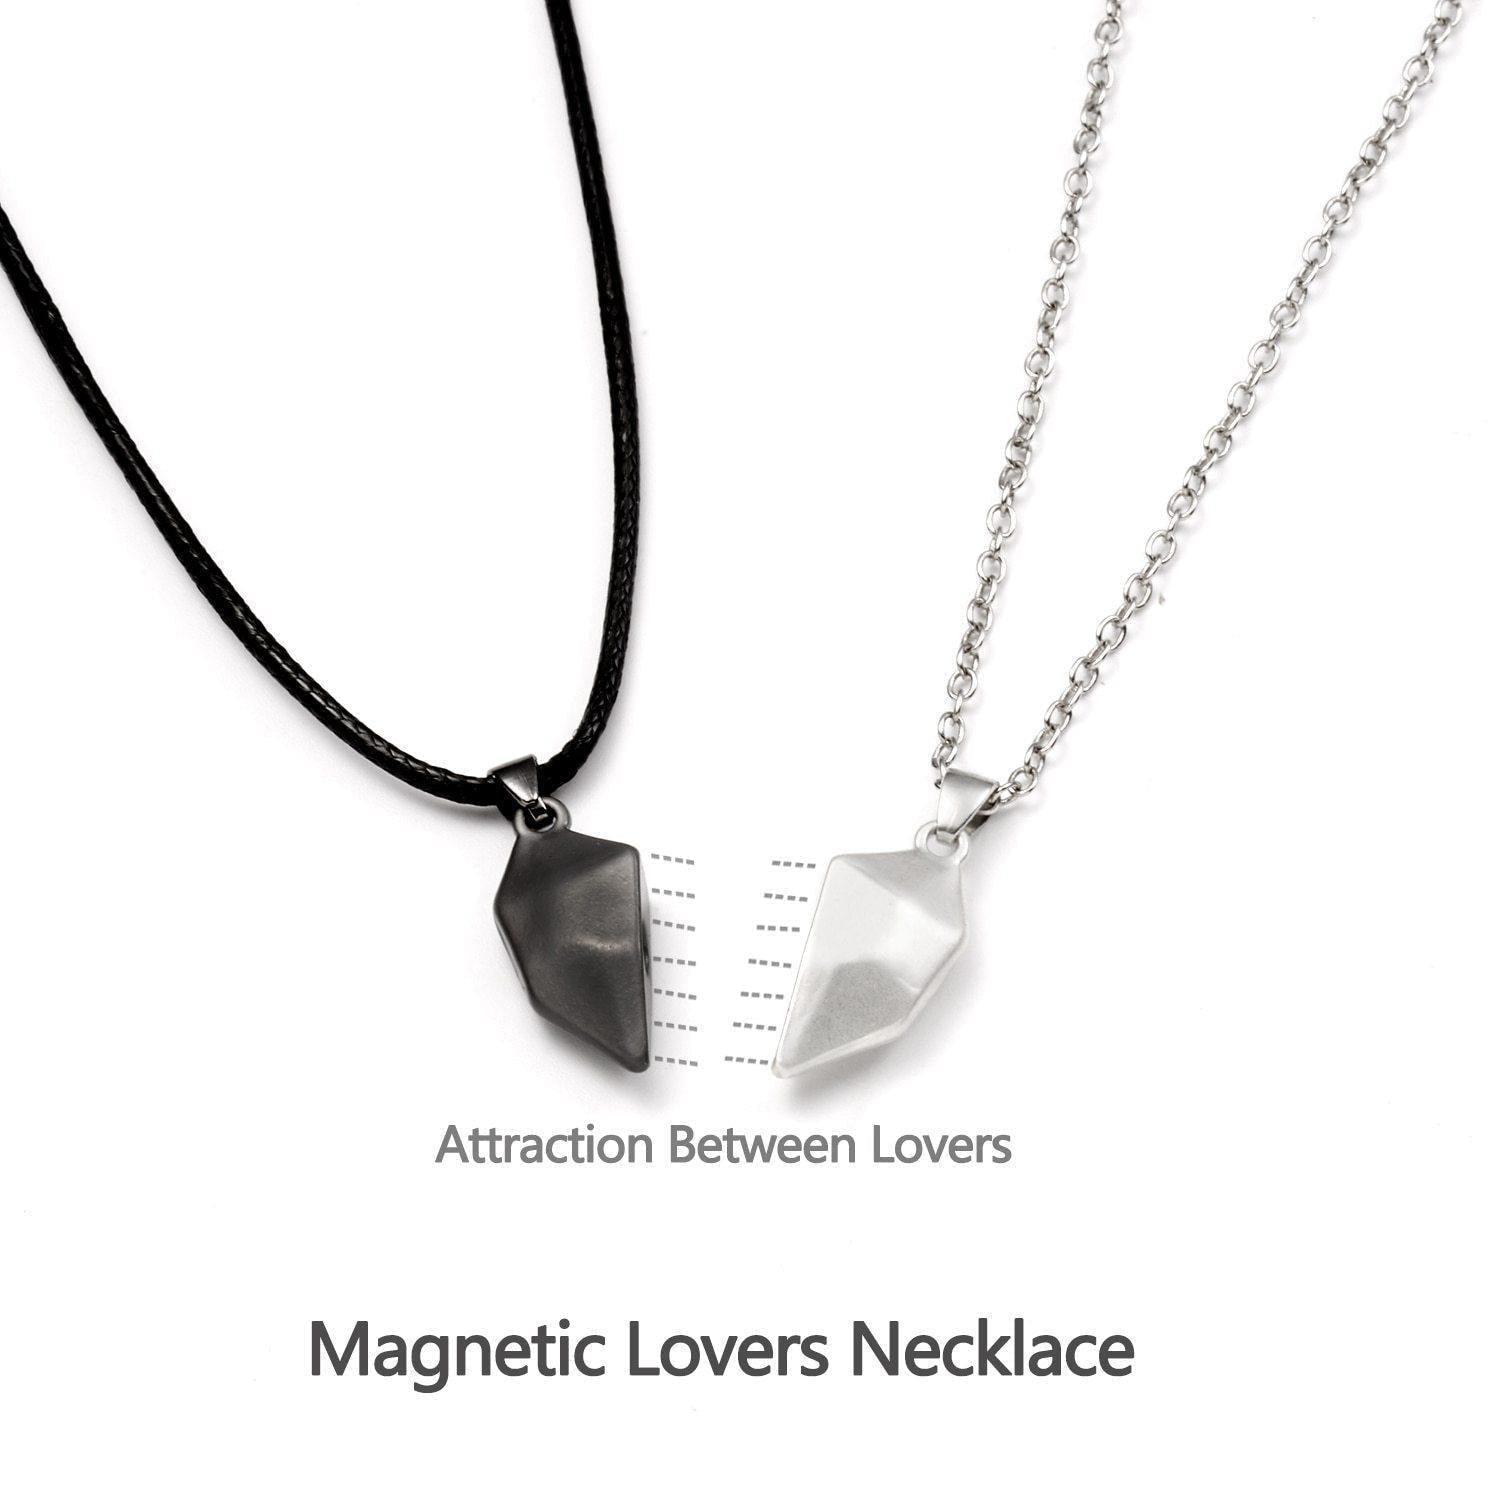 Couple Pendant Necklaces Gift To My Girlfriend for Christmas 2023 | Couple Pendant Necklaces Gift To My Girlfriend - undefined | gift ideas, Magnetic Couple Necklace, necklace, Necklaces | From Hunny Life | hunnylife.com